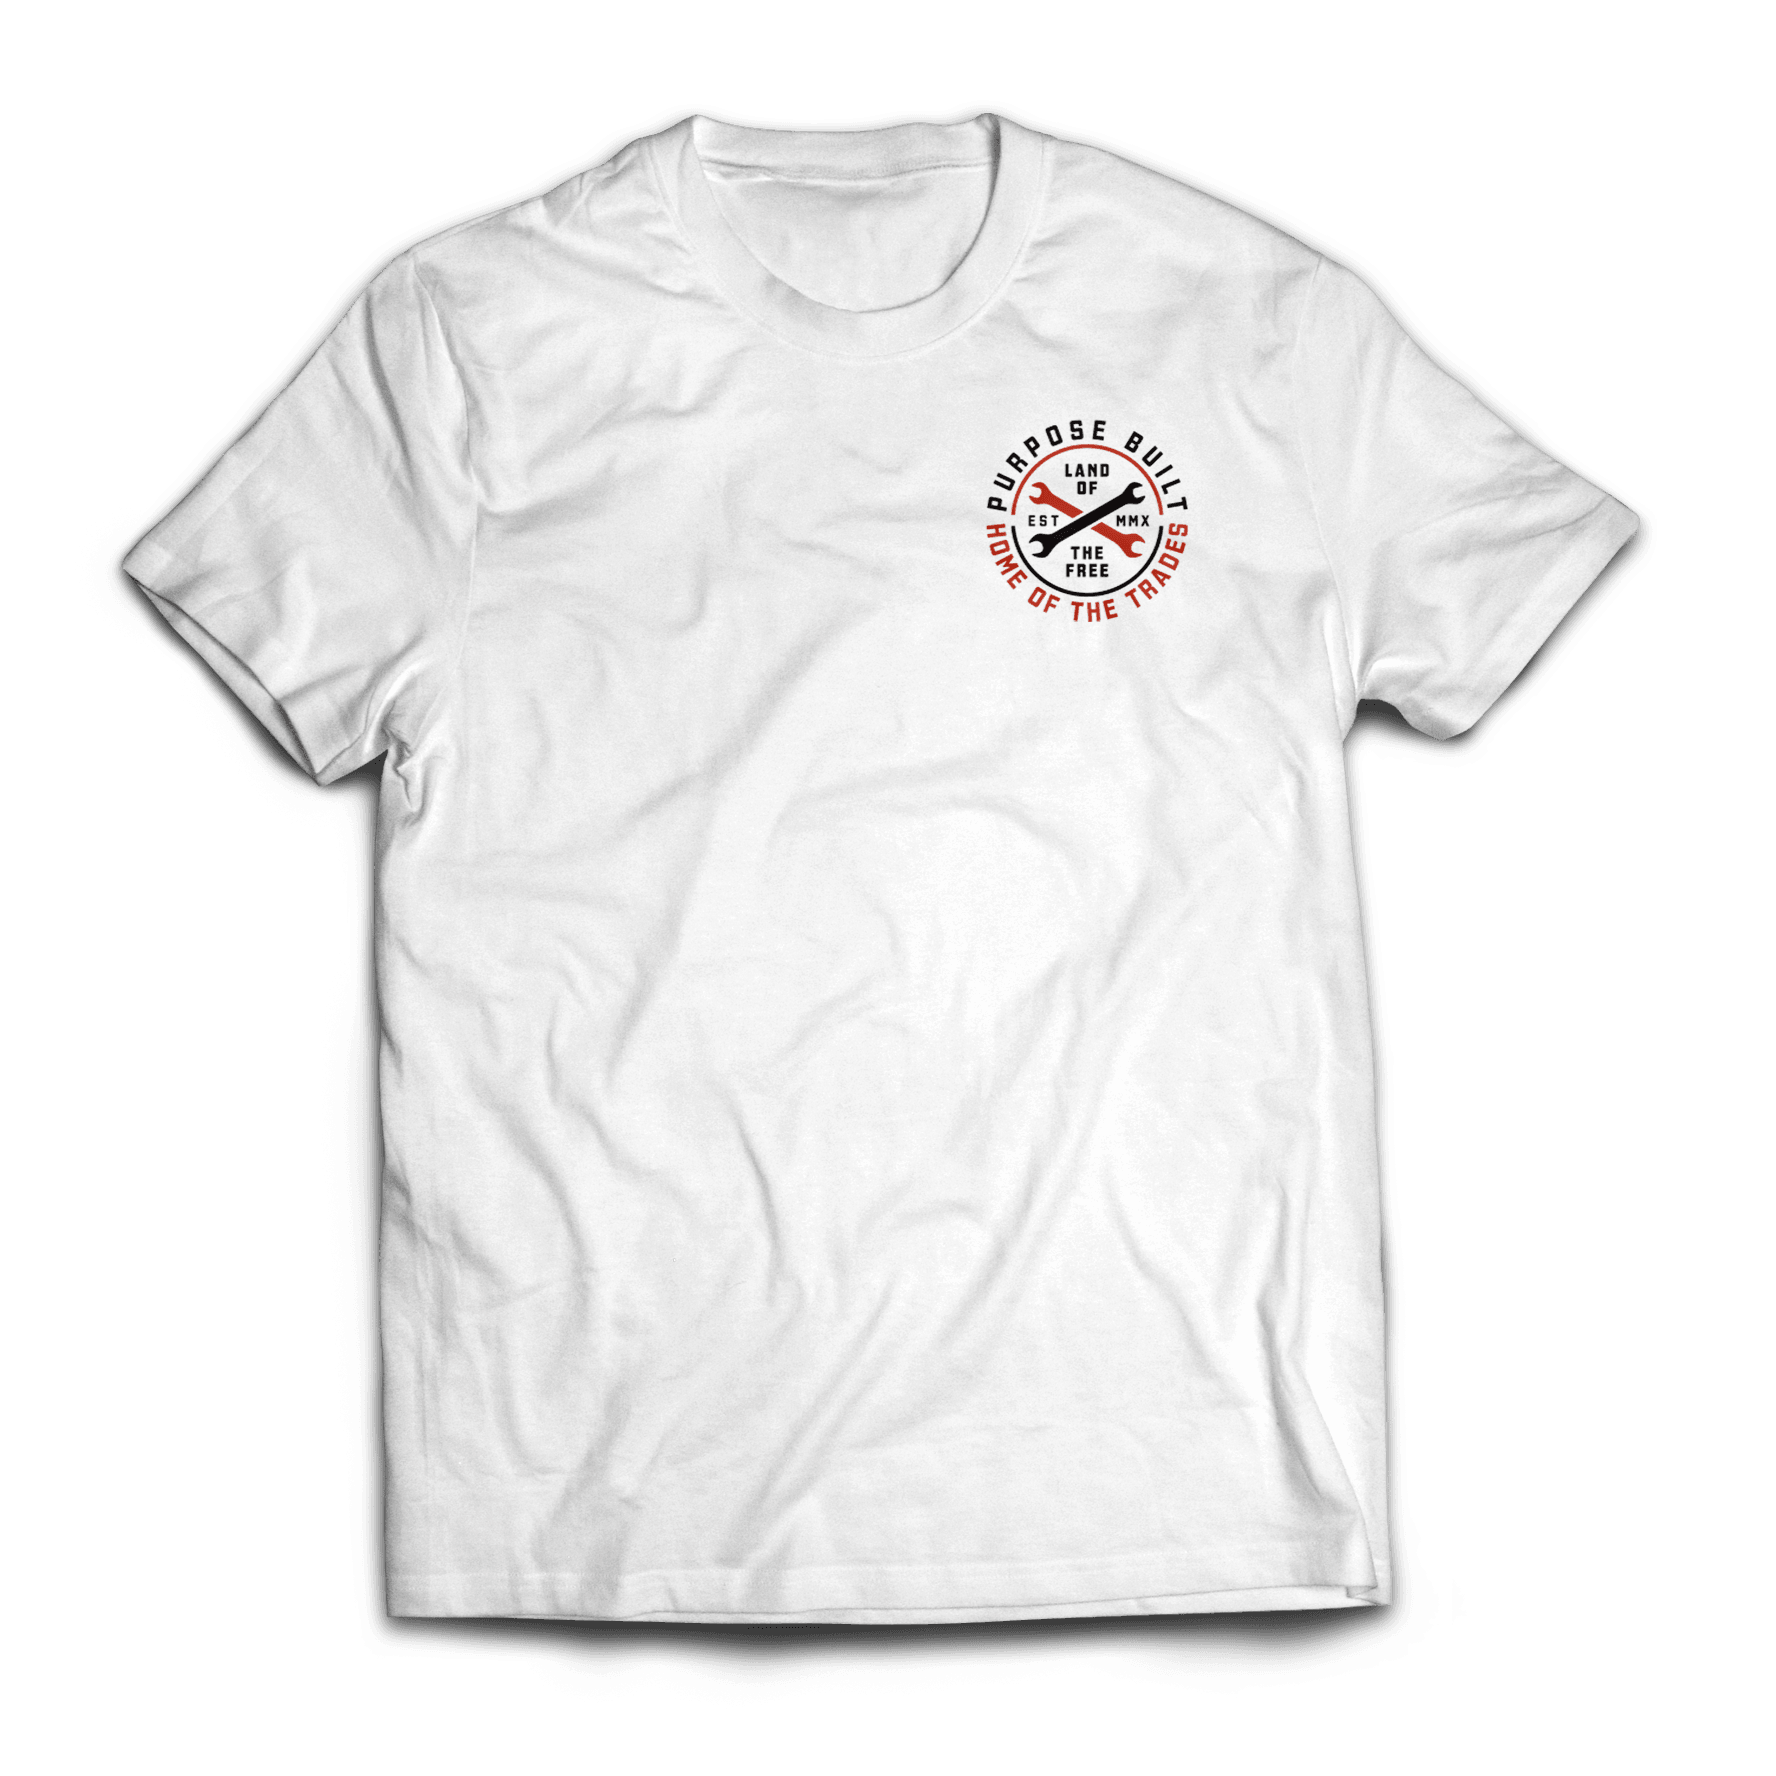 Hot Wrenches Tee, White